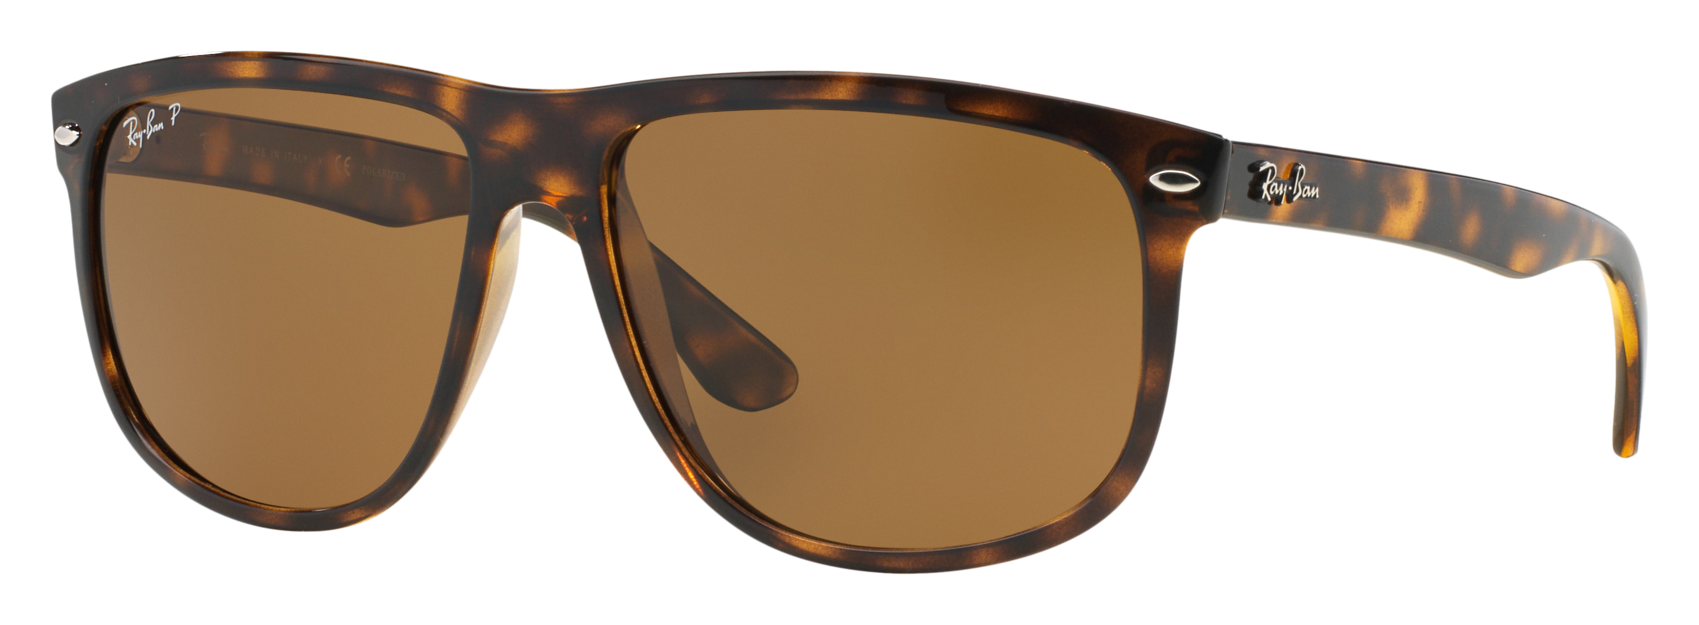 Ray-Ban RB4147 Polarized Sunglasses for Men